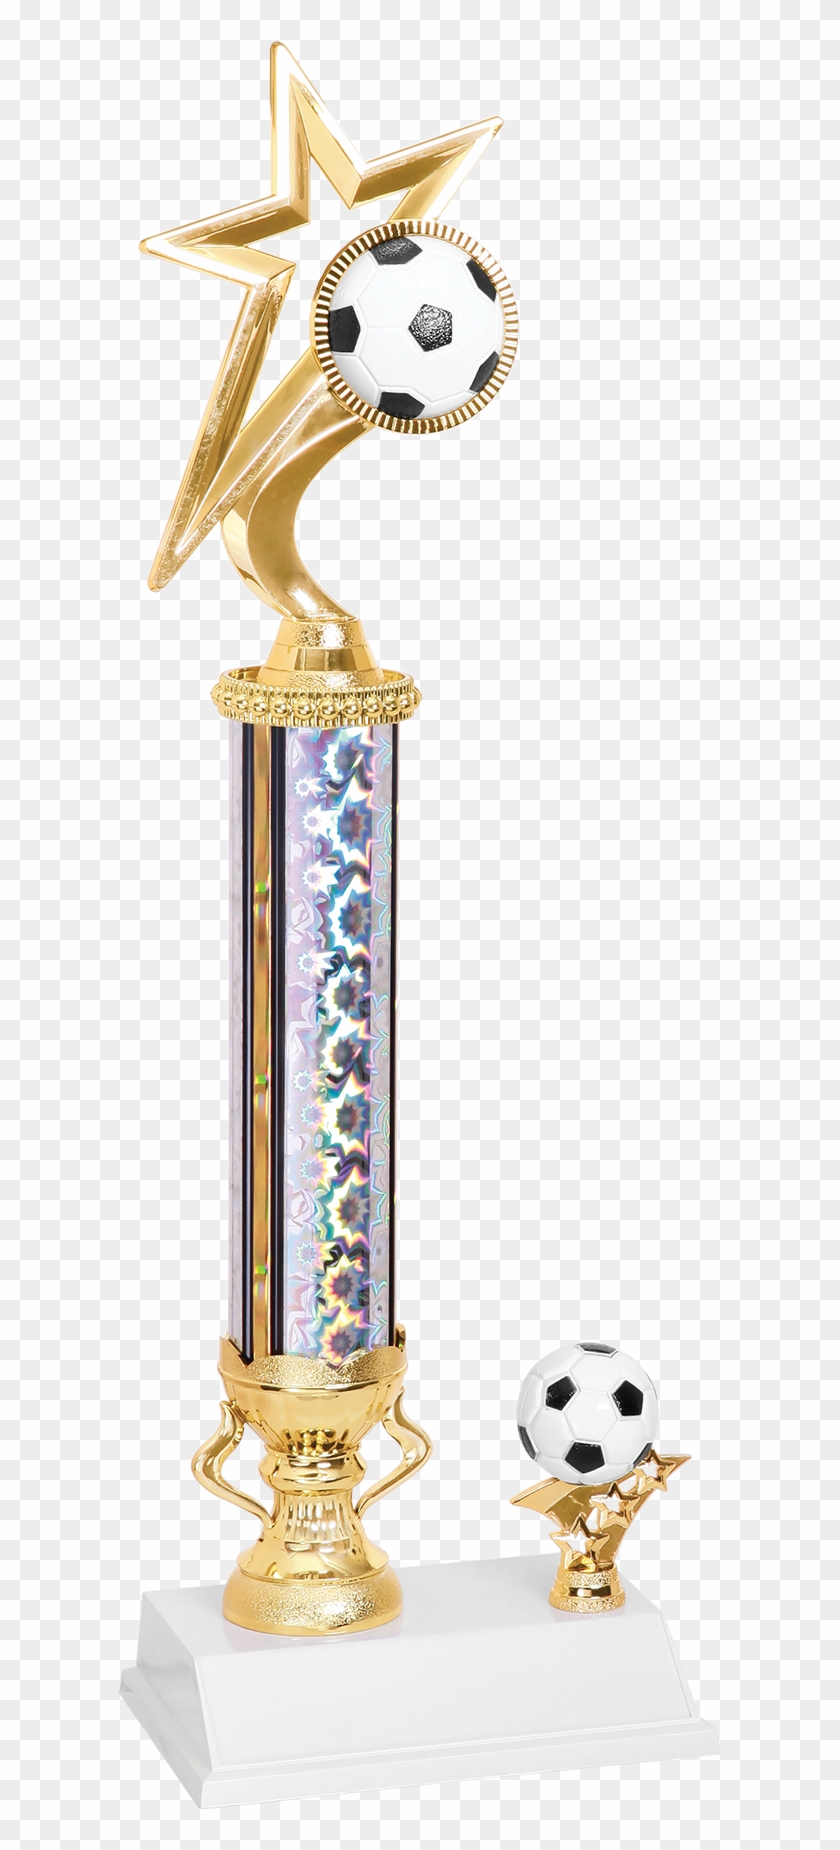 Dual Gold Star Soccer Trophy - Trophy Clipart #1904300